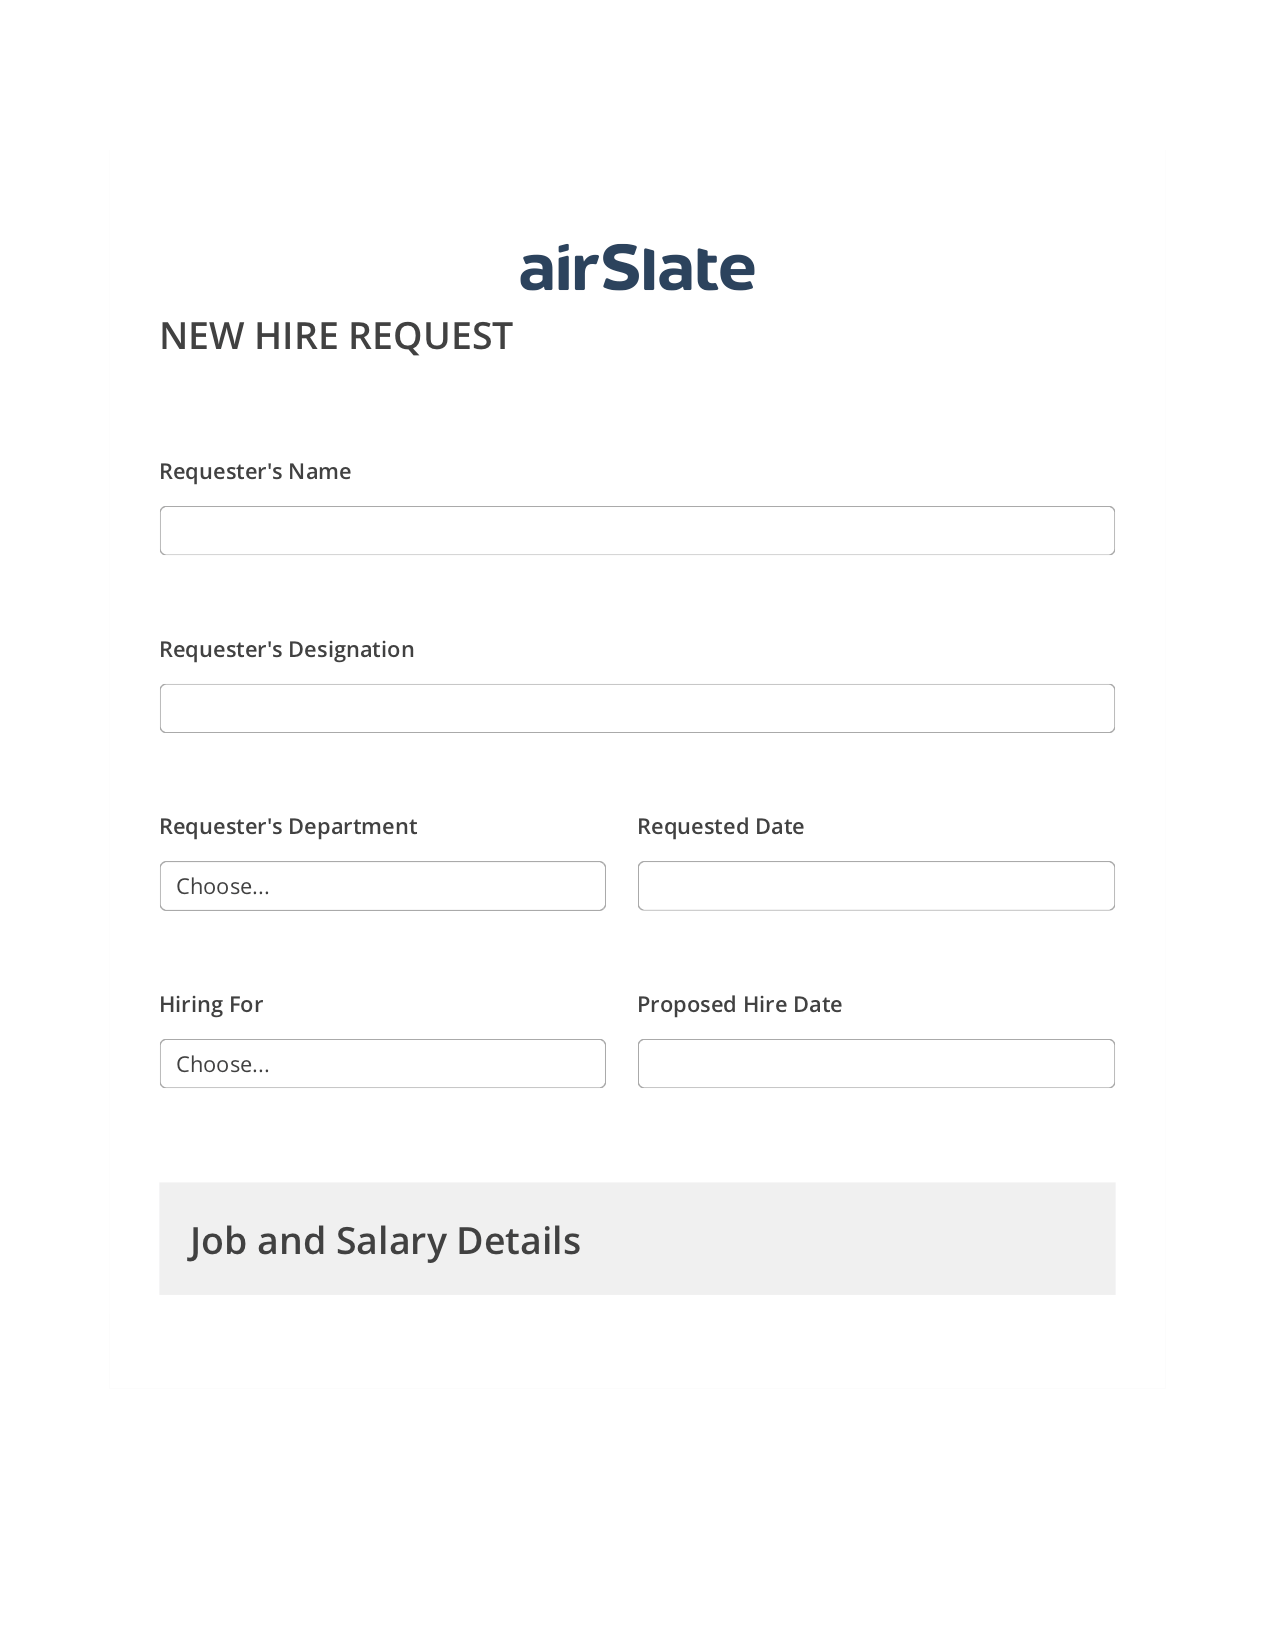 Multirole Hiring Request Workflow Pre-fill Dropdowns from Airtable, Create MS Dynamics 365 Records Bot, Export to NetSuite Bot